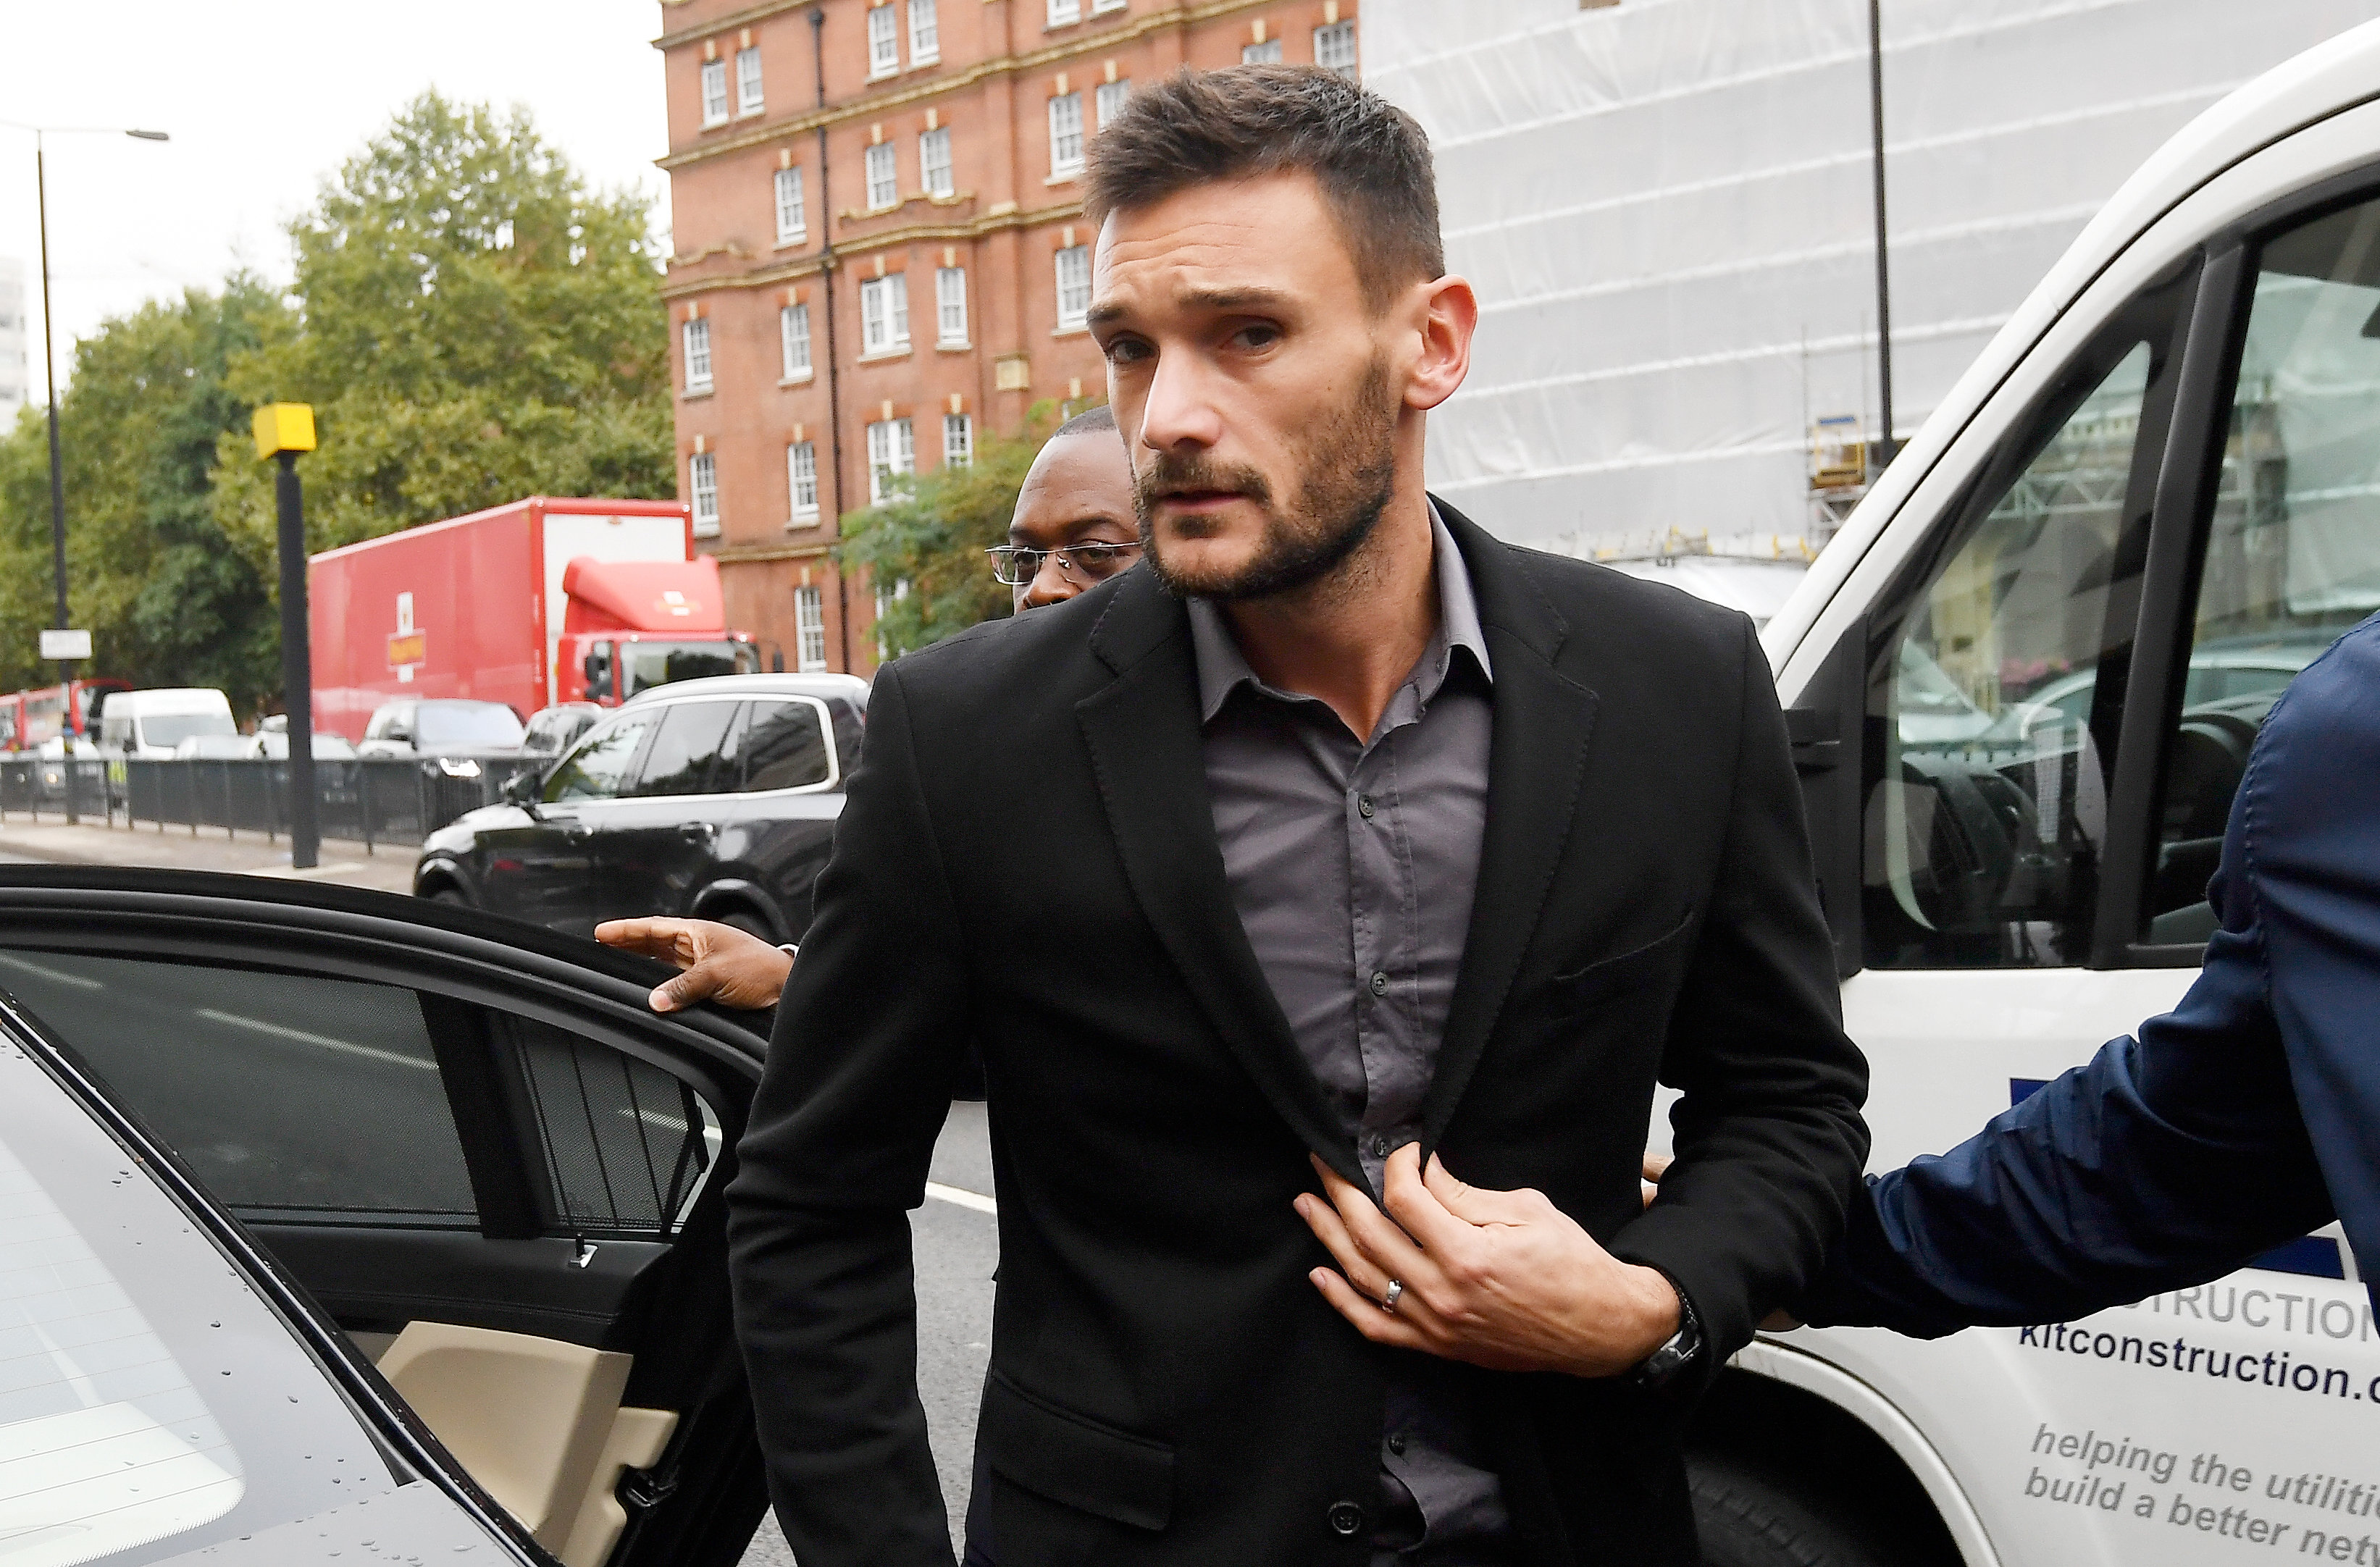 Football: France keeper Lloris banned for drink-driving